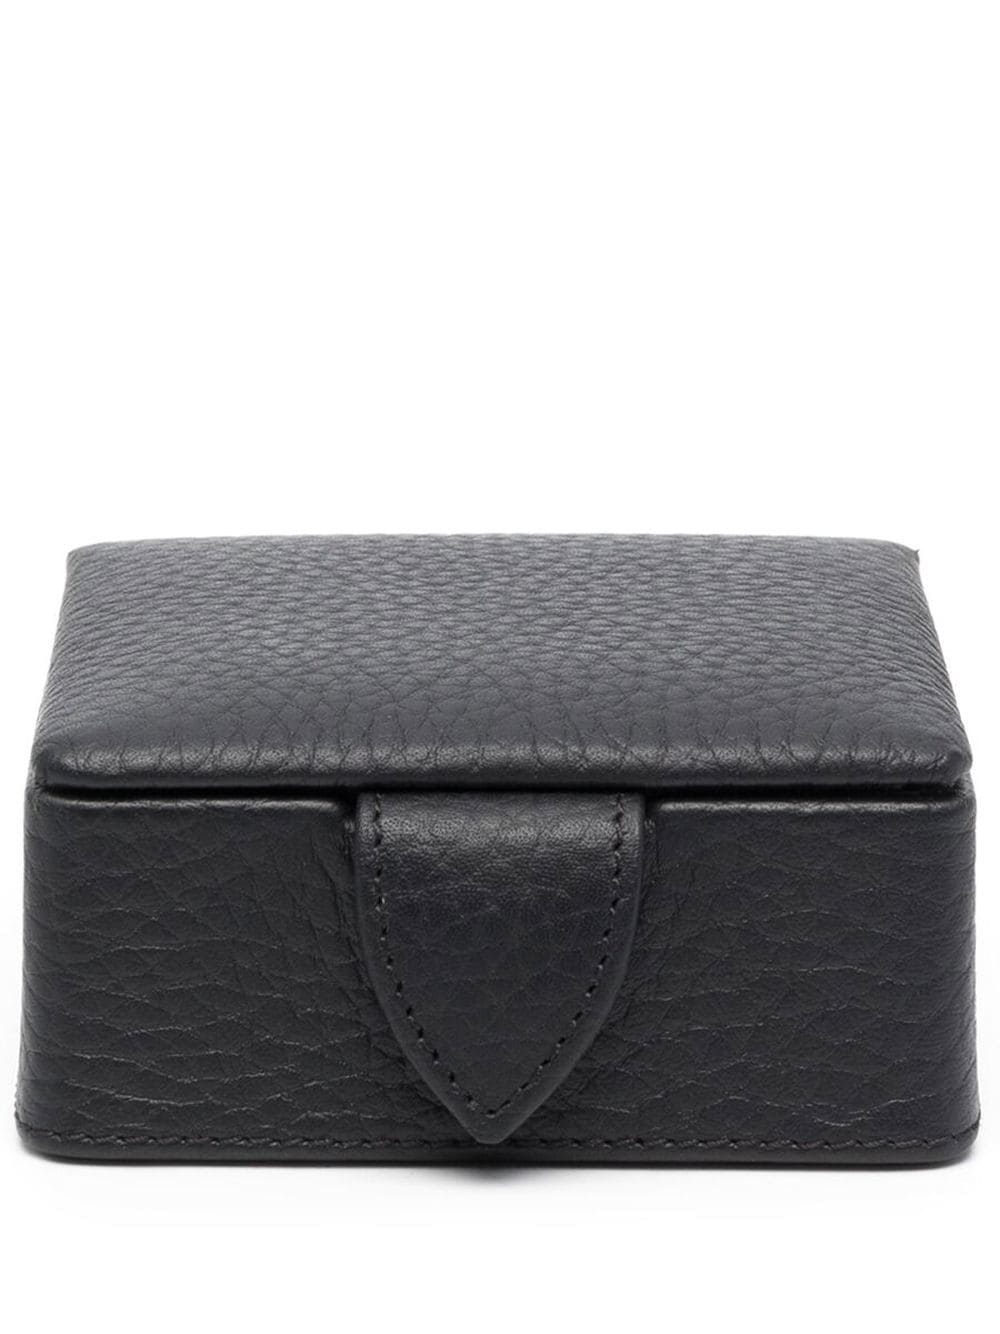 Aspinal Of London leather stud box - Black von Aspinal Of London